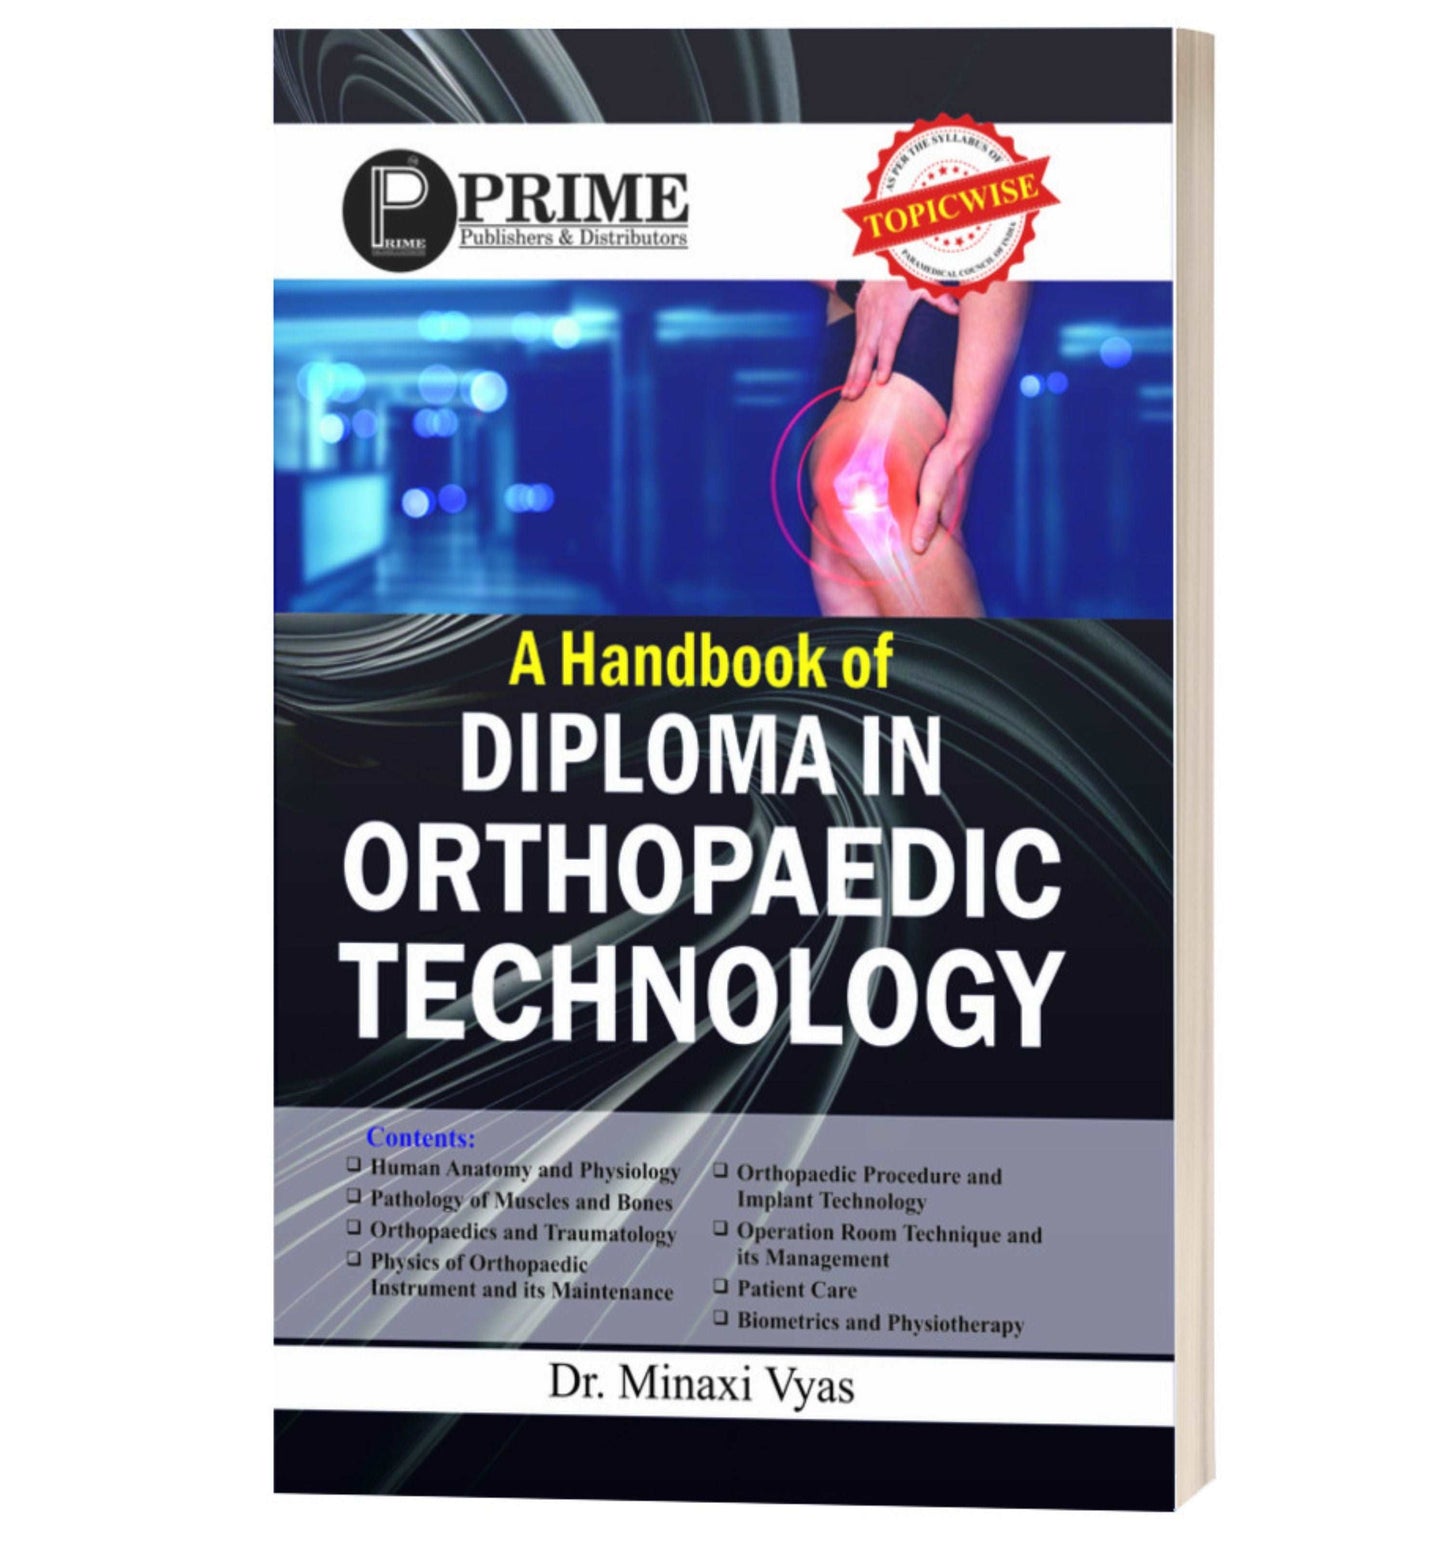 A handbook of Diploma in Orthopaedic Technology